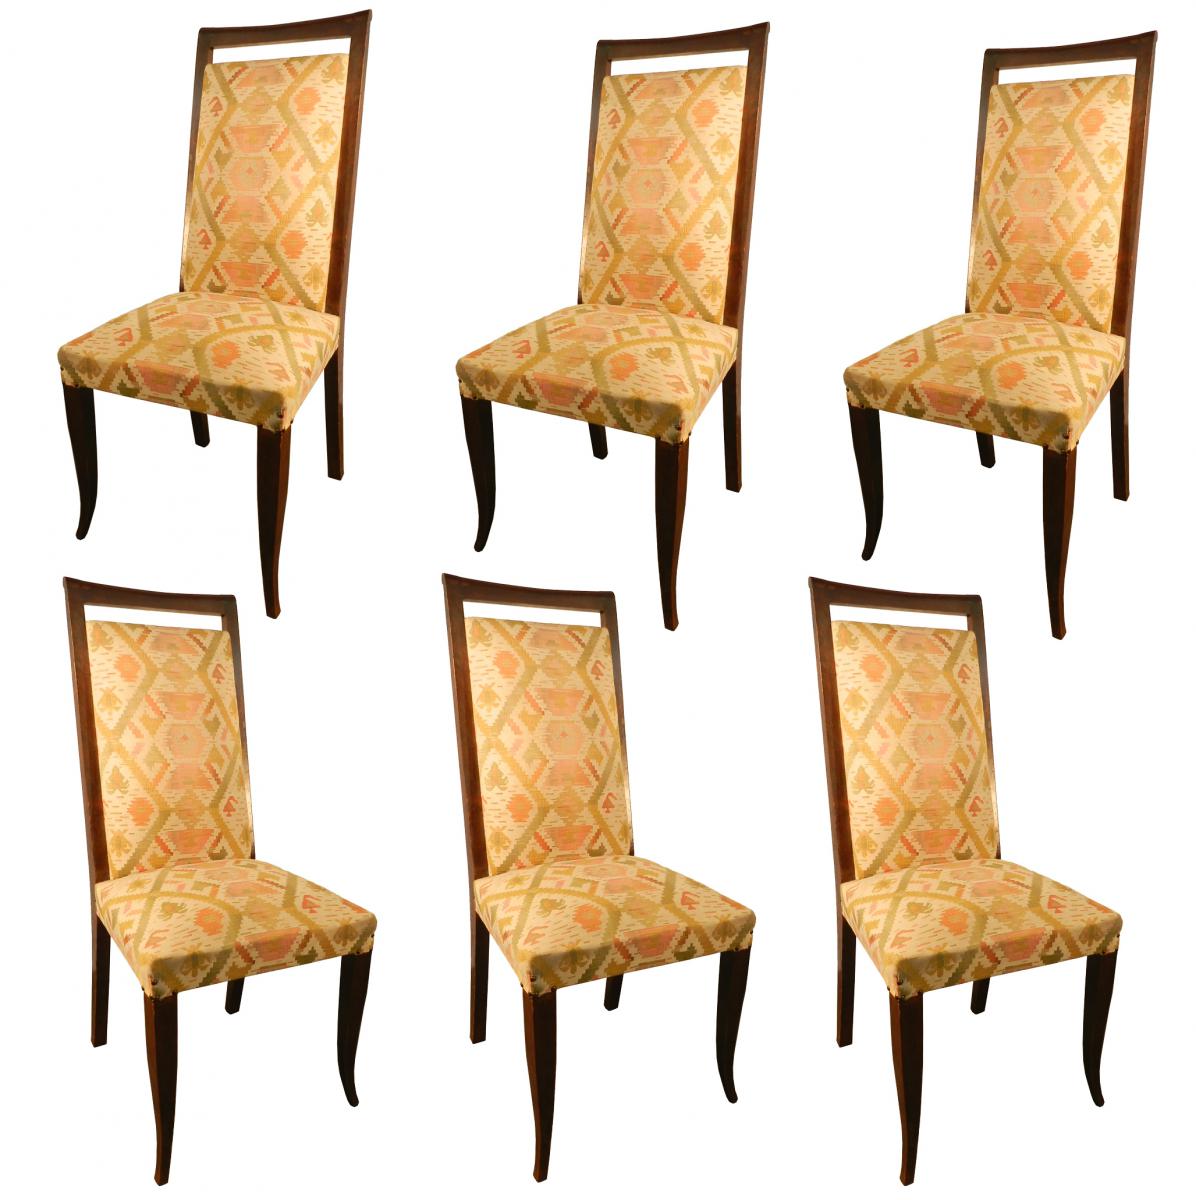 Suite Of 6 Art Deco Chairs With High Backs, Circa 1930